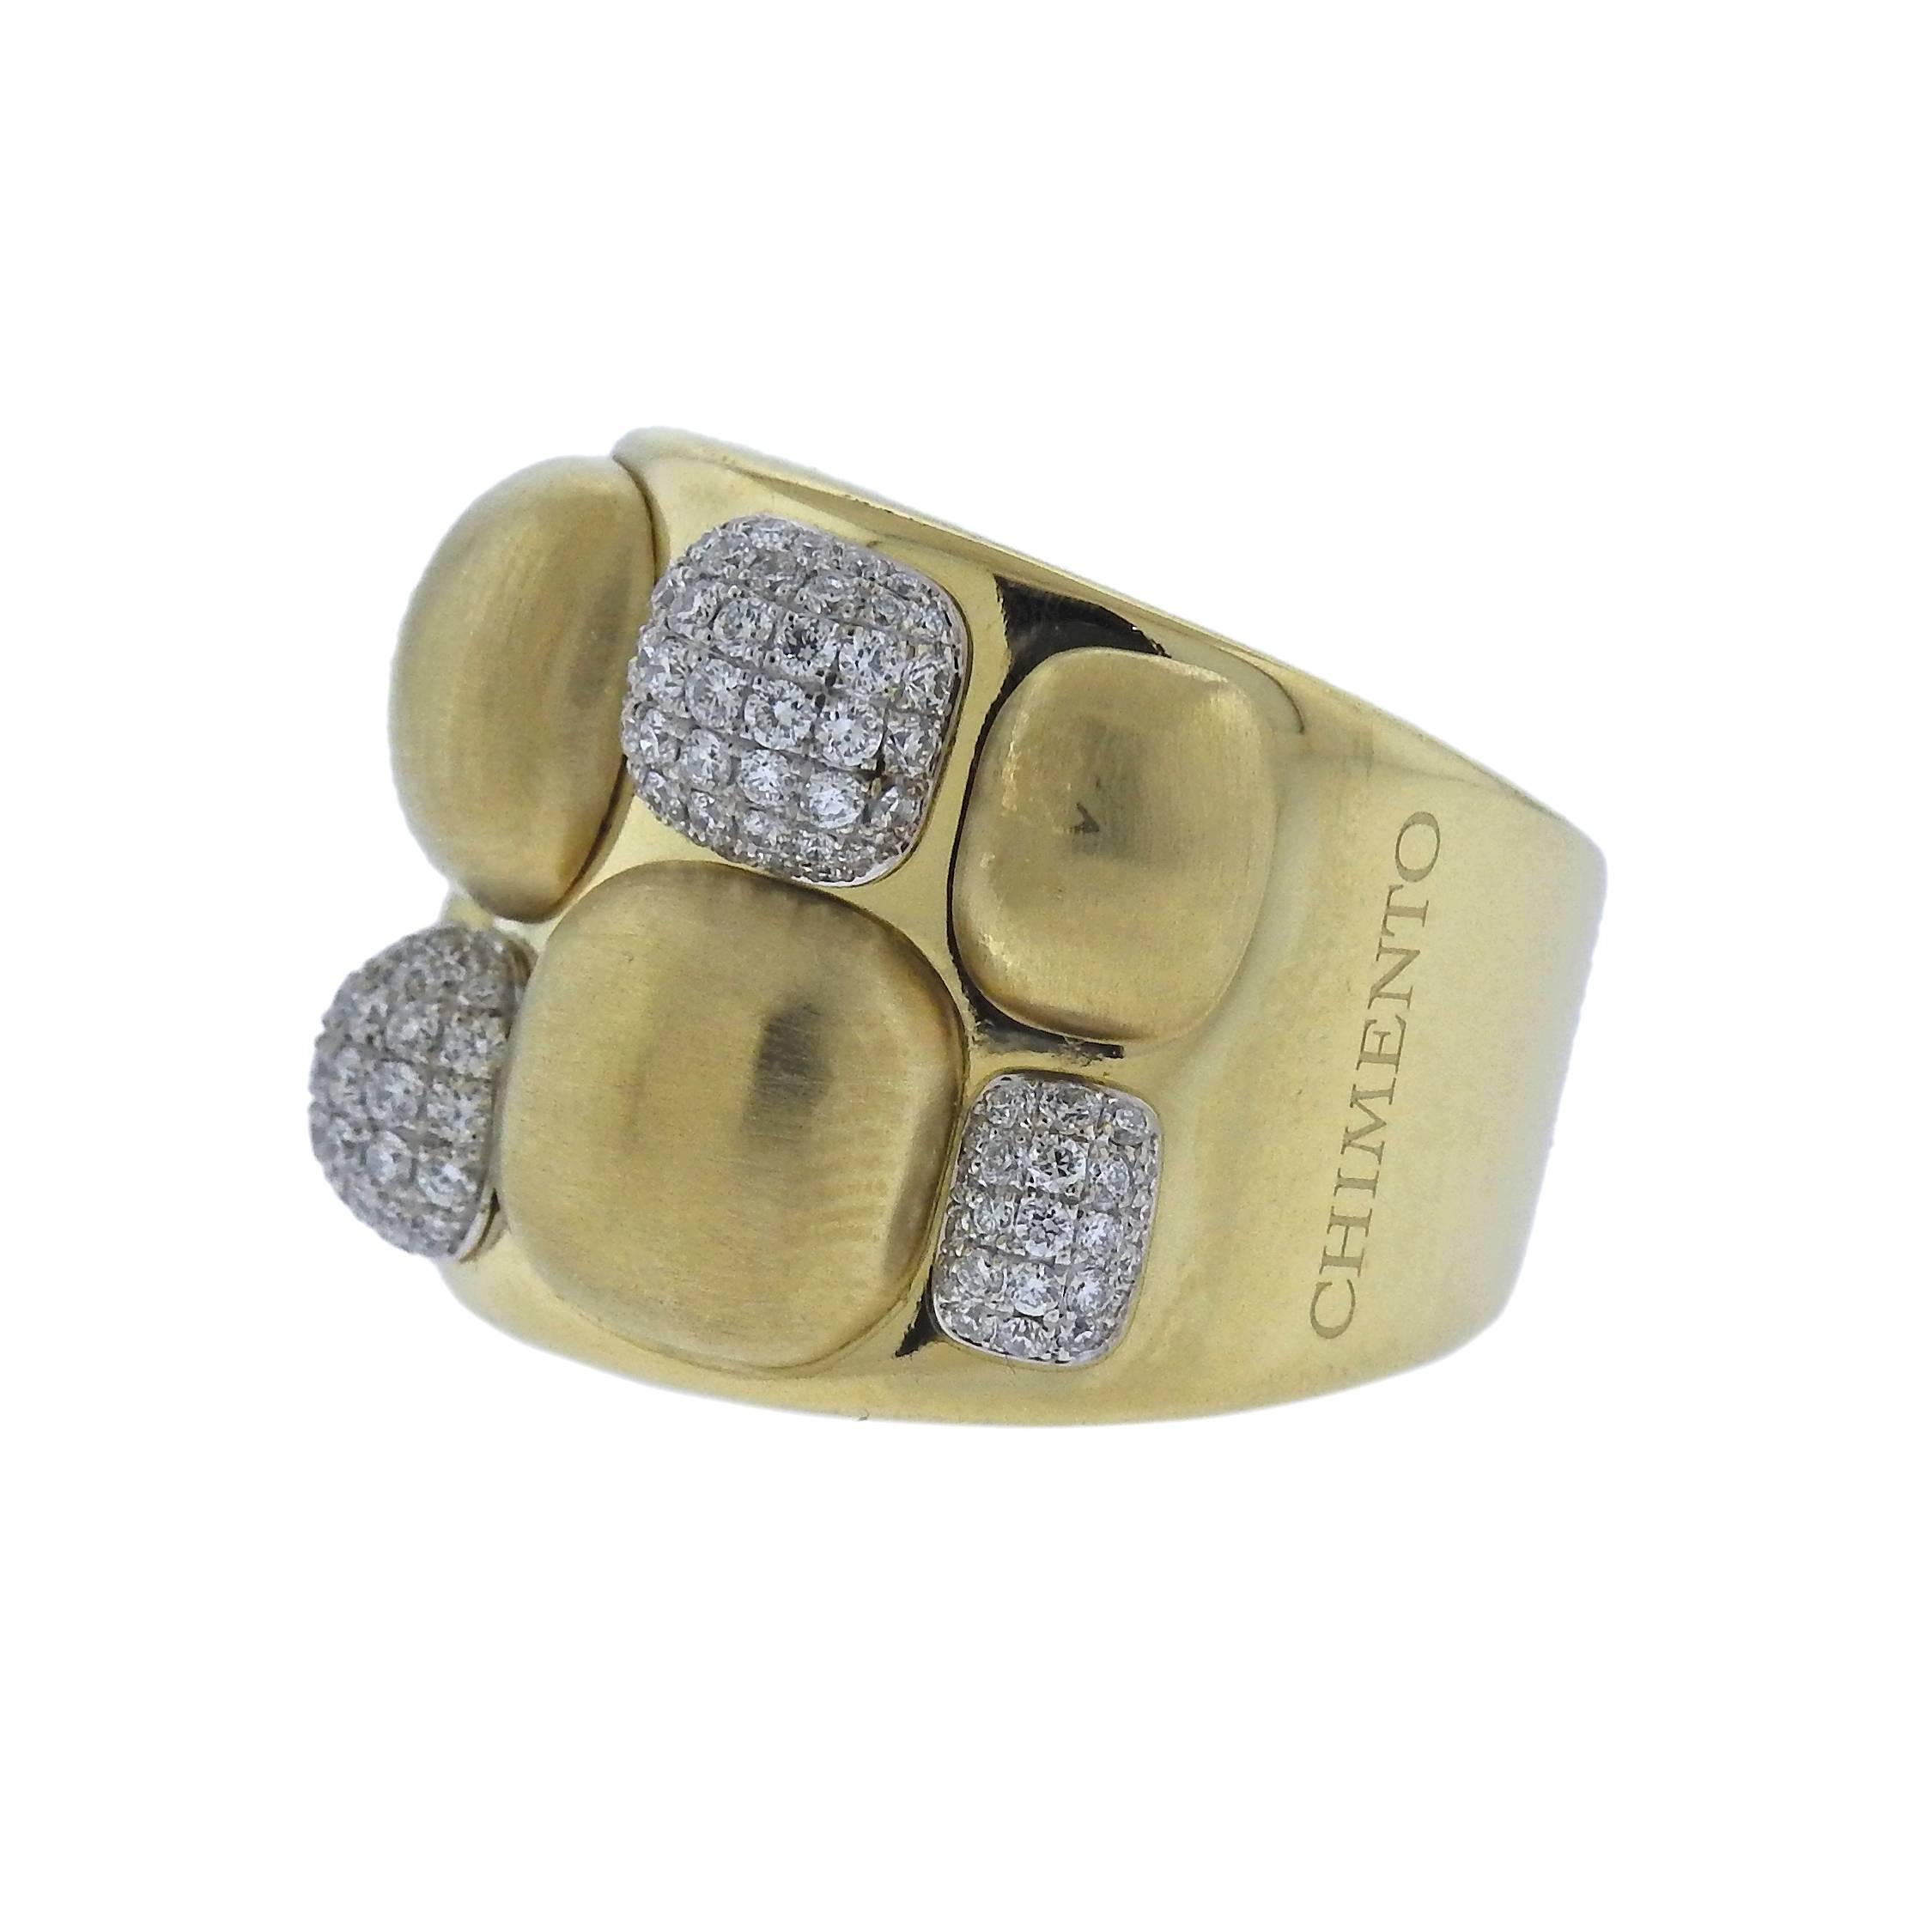  18k yellow gold ring, crafted  by Chimento for Dune collection, decorated with approx. 0.80ctw in diamonds. Ring size - 6 3/4, ring top is 19mm wide, weighs 21.8 grams. Marked: AH, 750, Chimento. 